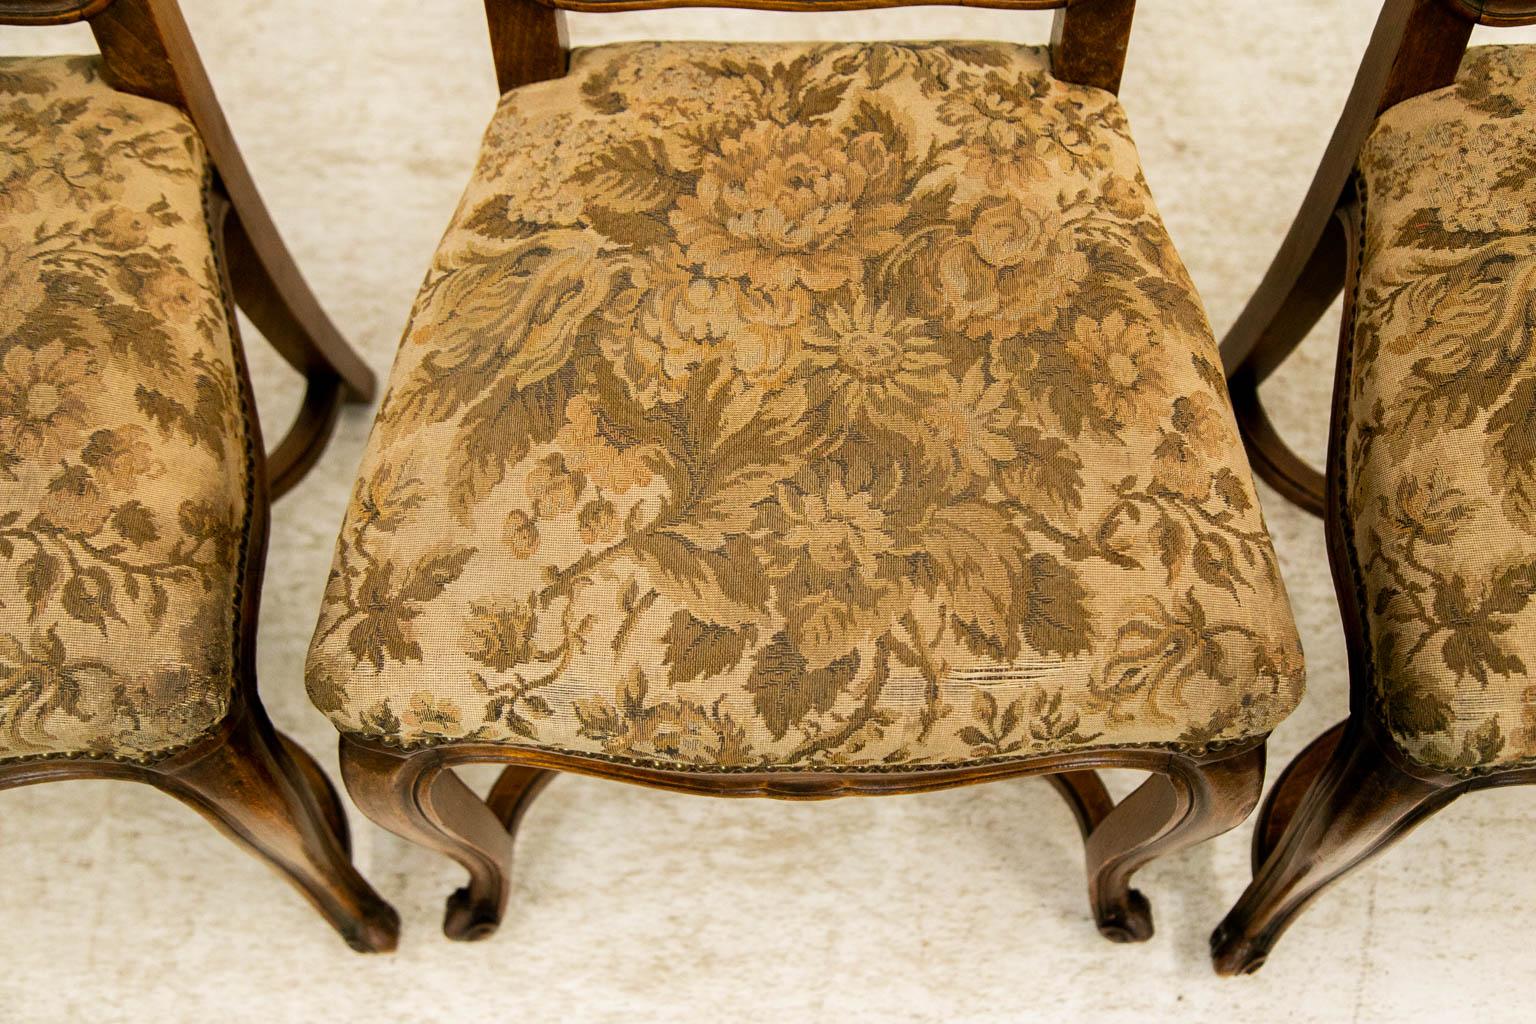 The crest rails of these chairs are carved with shaped scrolls. The back splats and styles are carved with incised beads framing a concave shape. The cabriole legs are connected by a shaped 